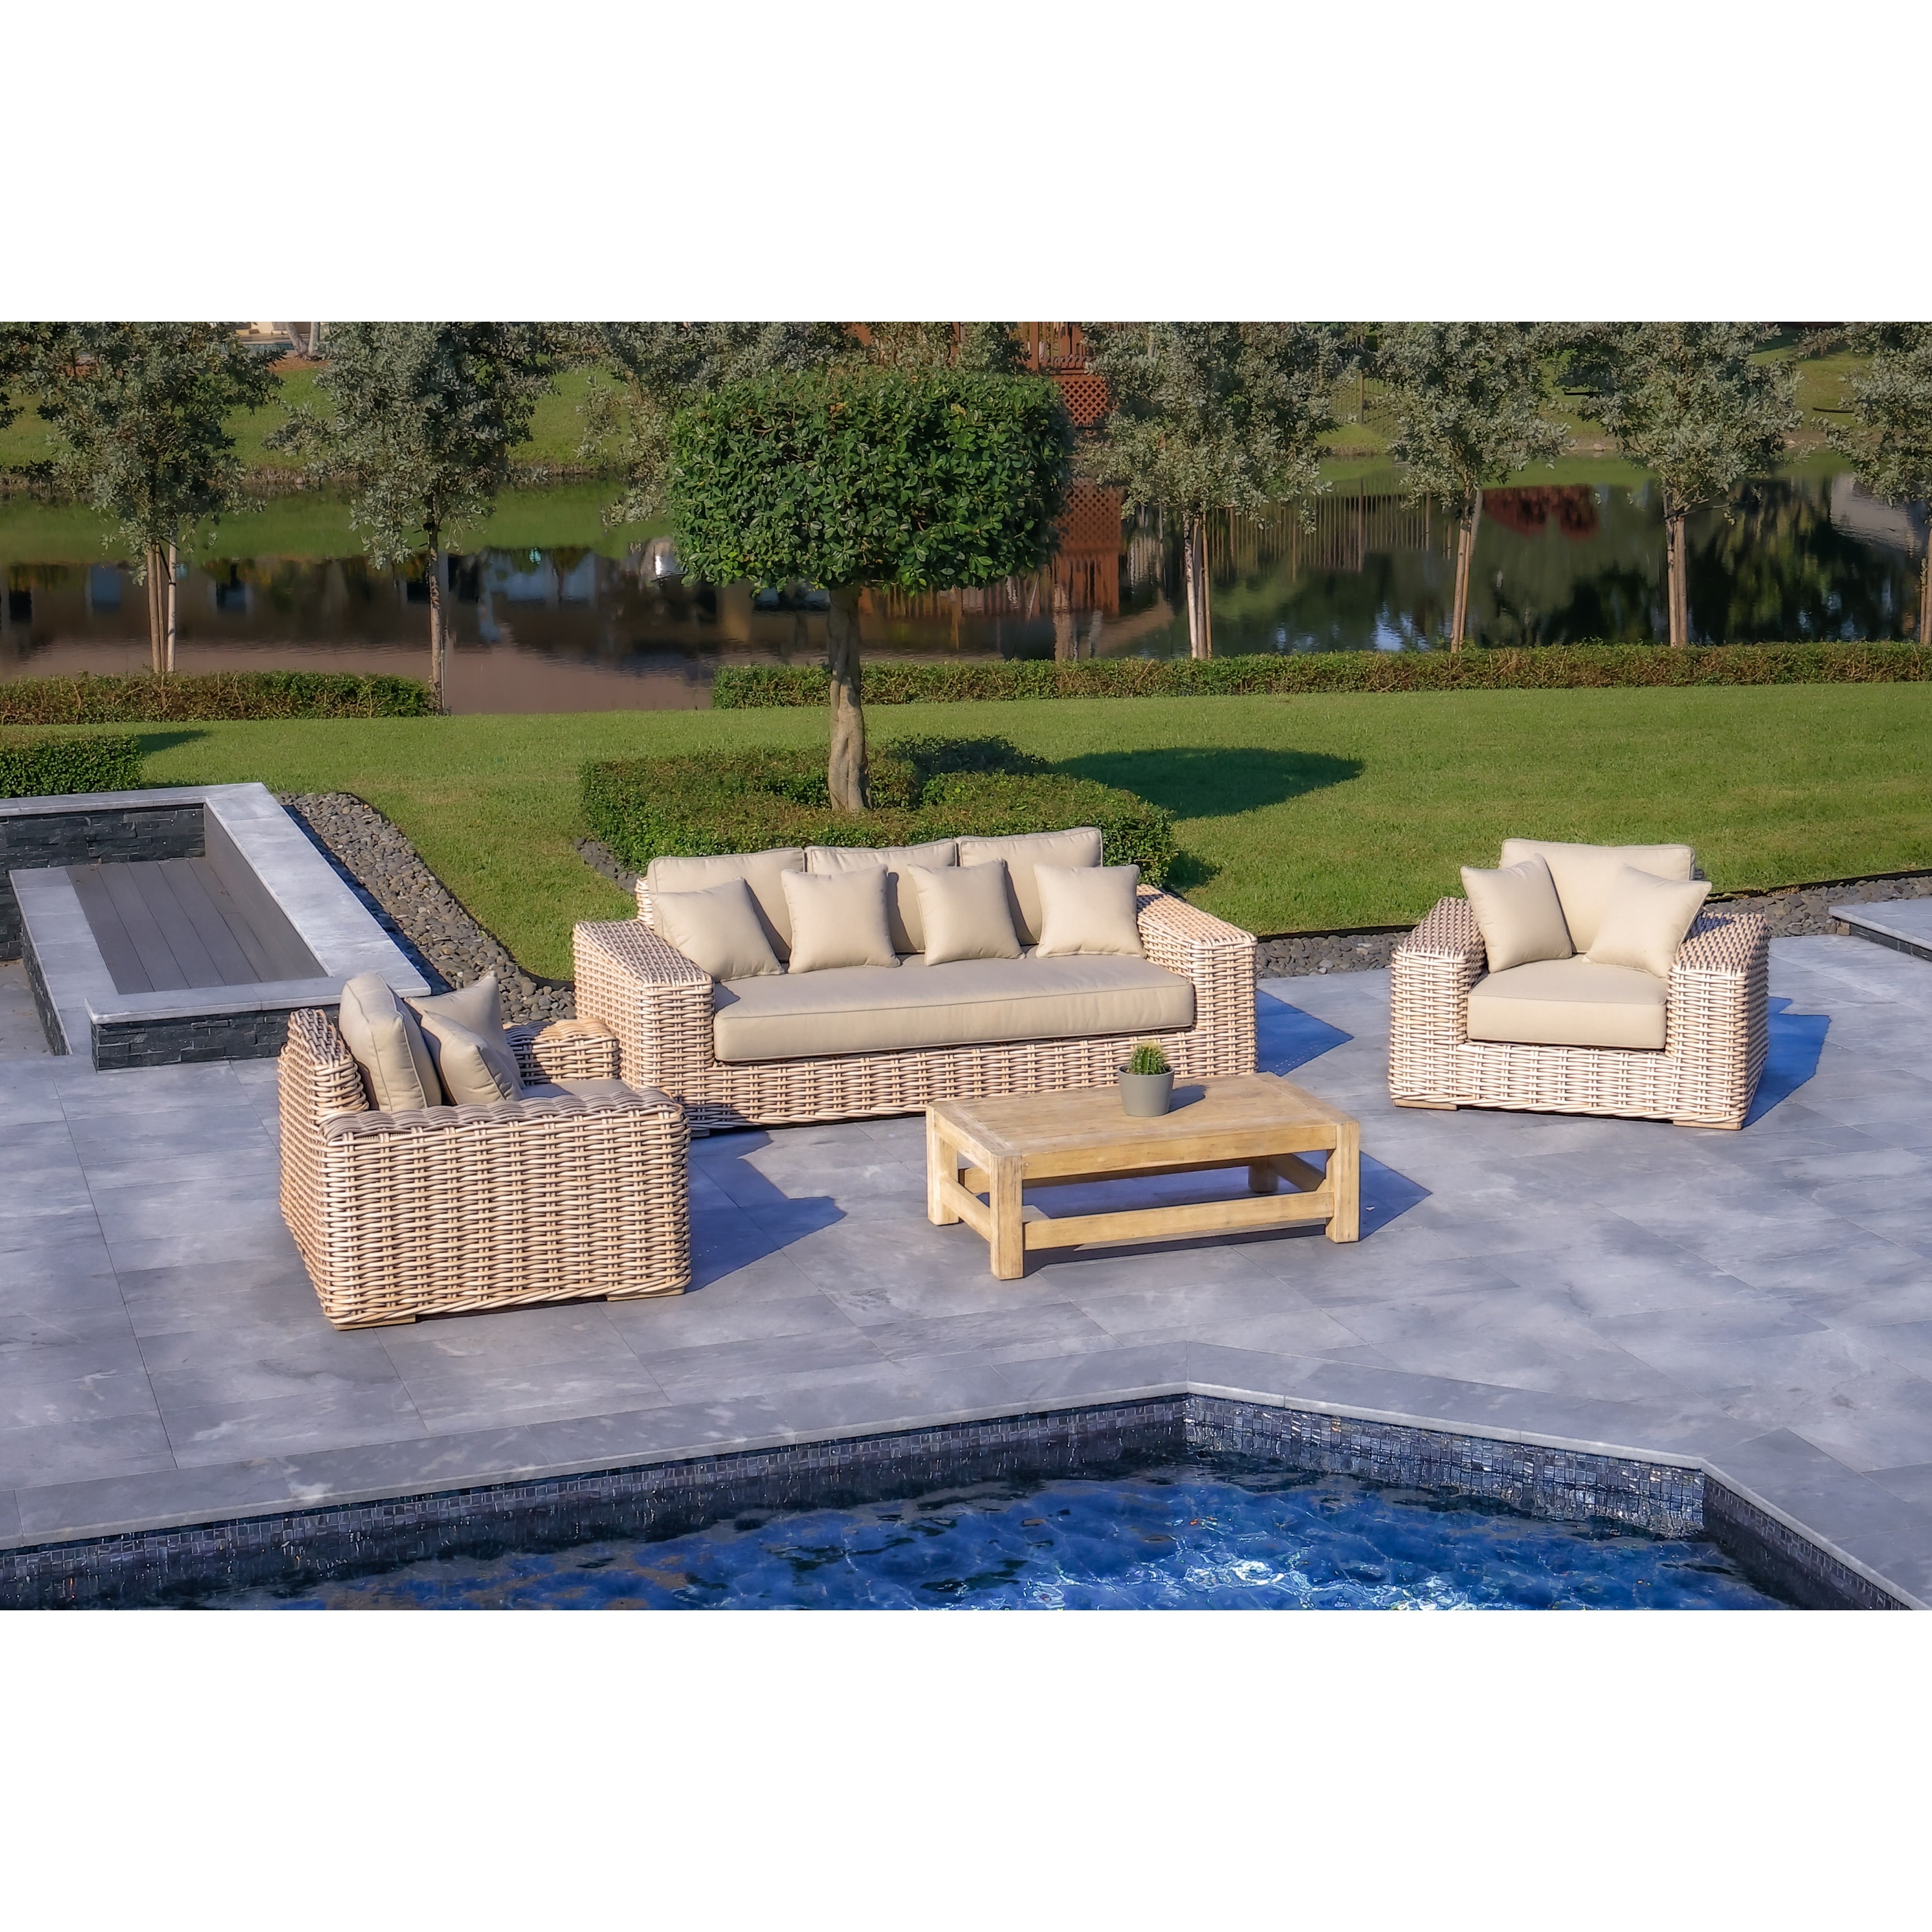 Anna Lux 4-piece Patio Extra Deep Seating Wicker Aluminum Frame Conversation Set With Wood Coffee Table In White and Grey